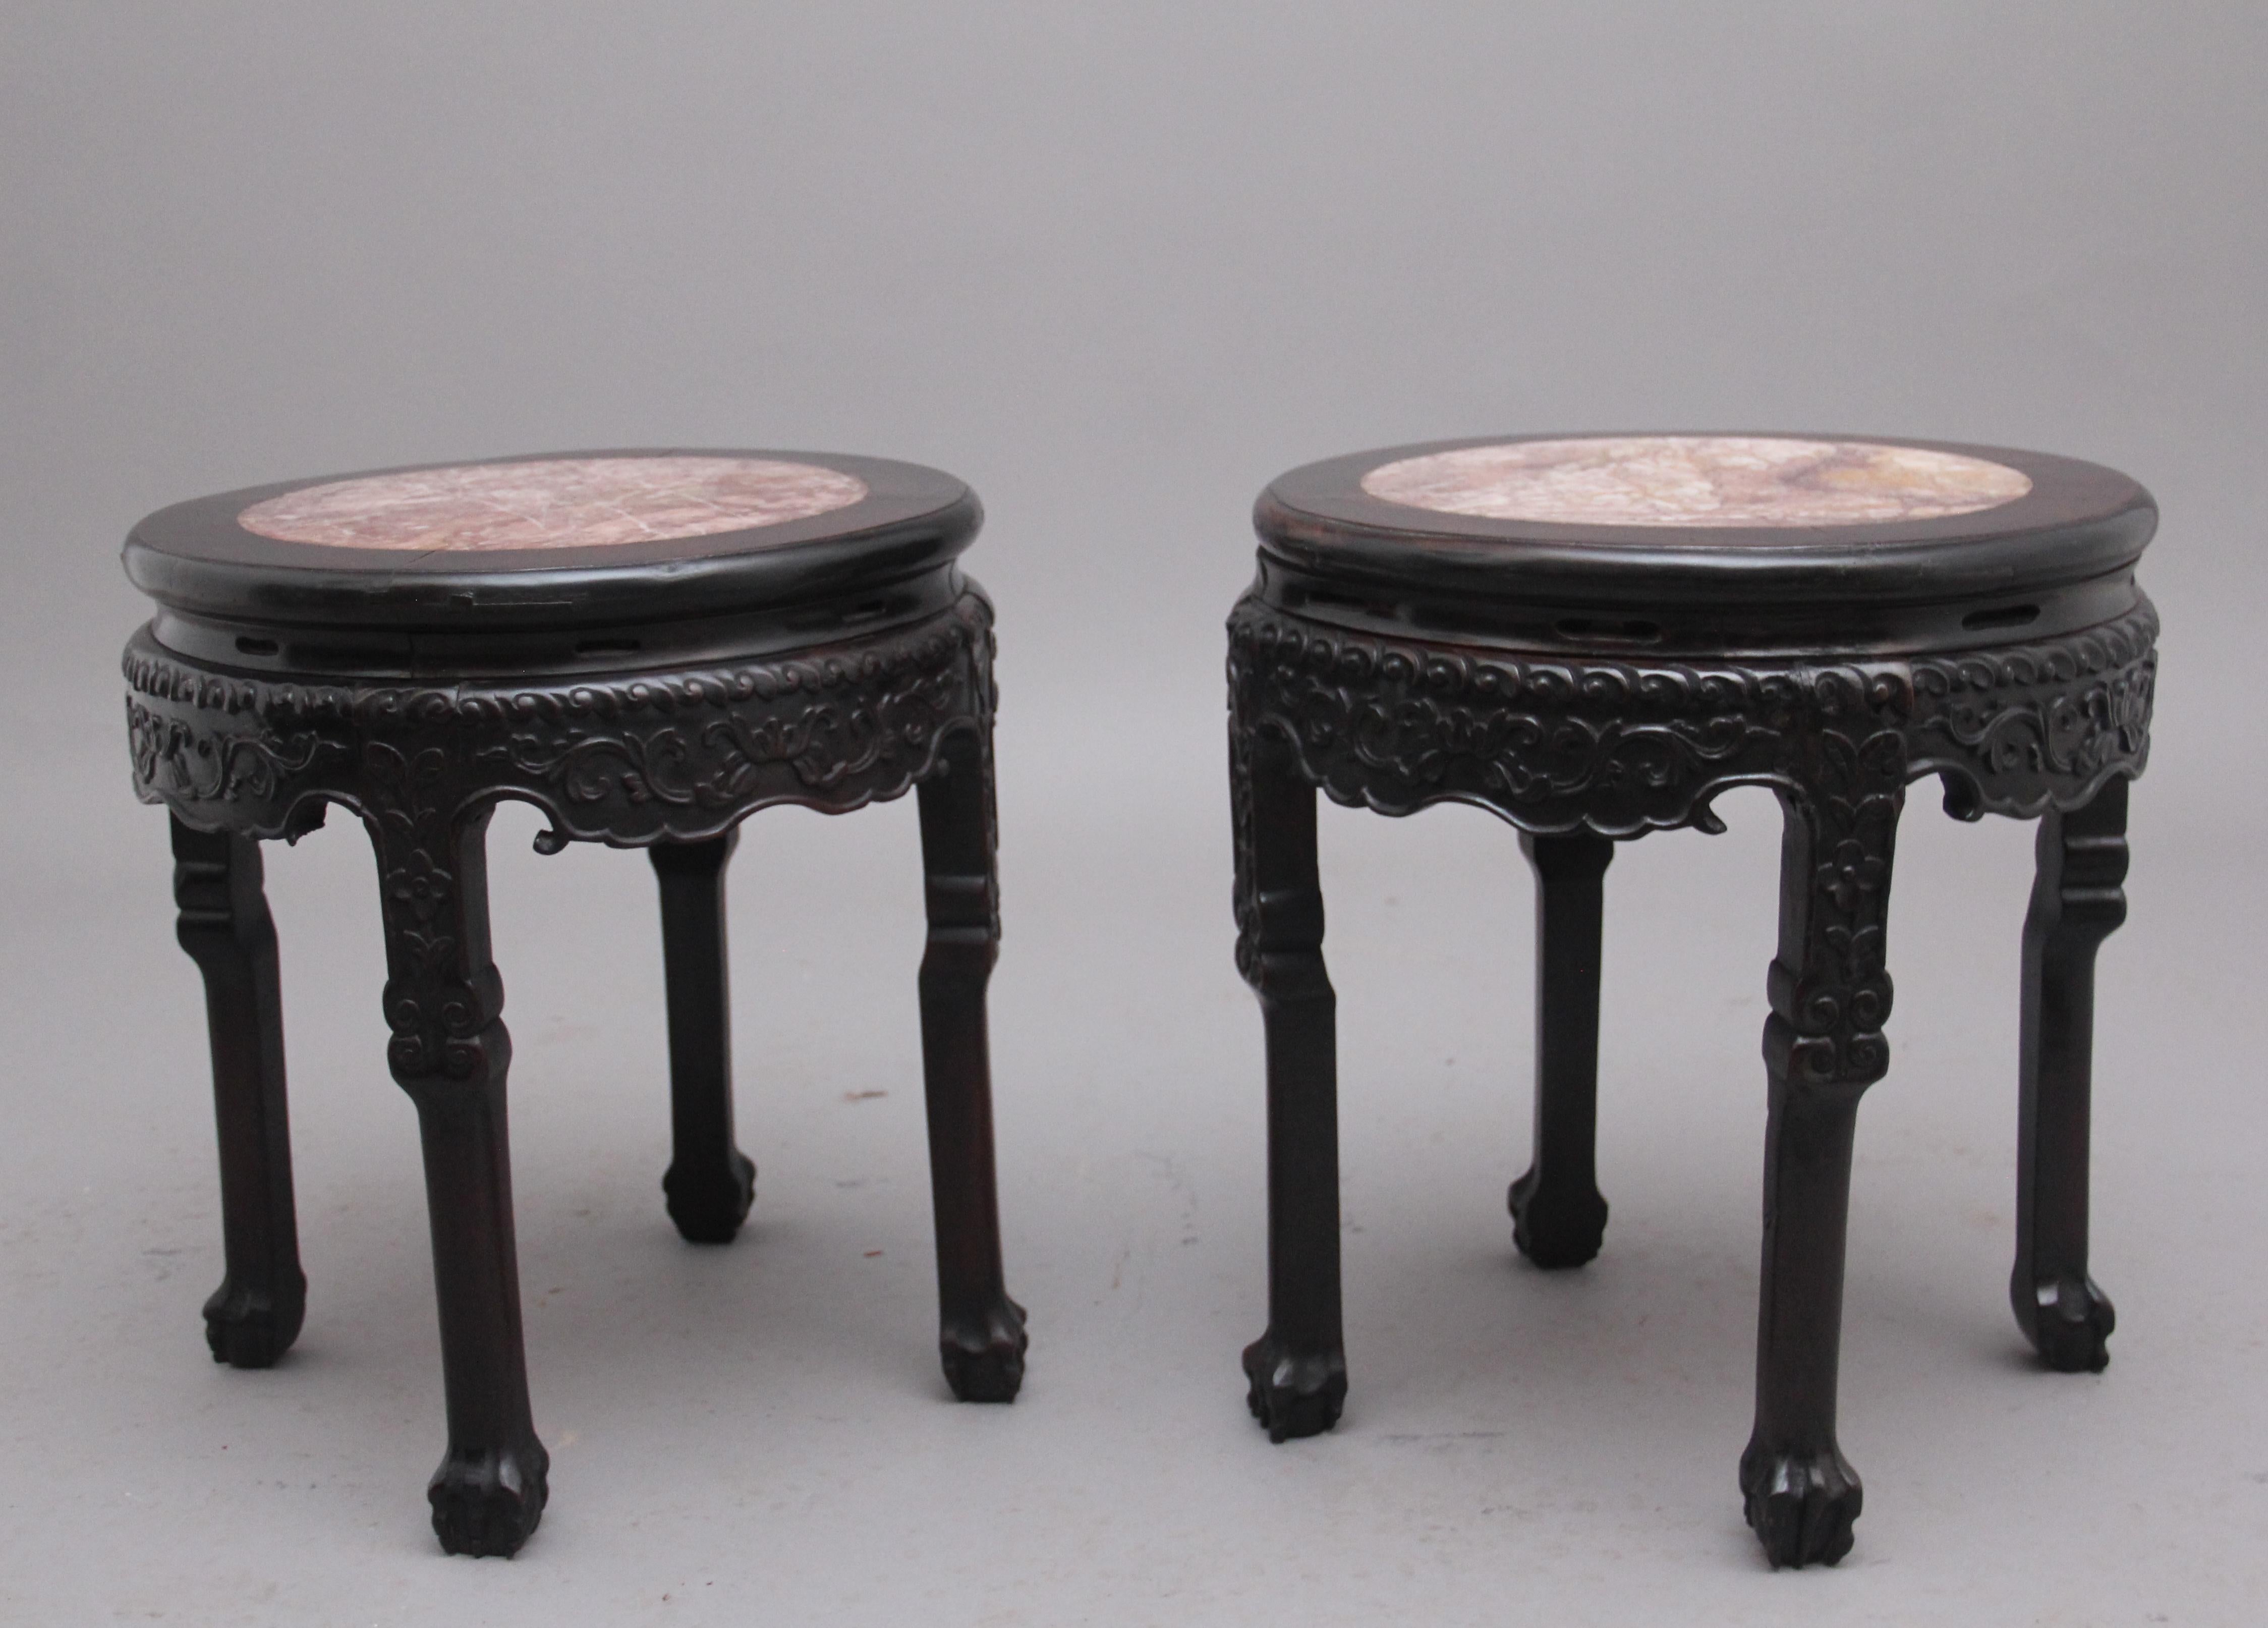 A pair of 19th Century Chinese carved hardwood occasional table, the circular shaped top with the original rose marble inserts with concave sides over a caved apron on all sides, raised on shaped legs terminating on ball and claw feet. Circa 1880.